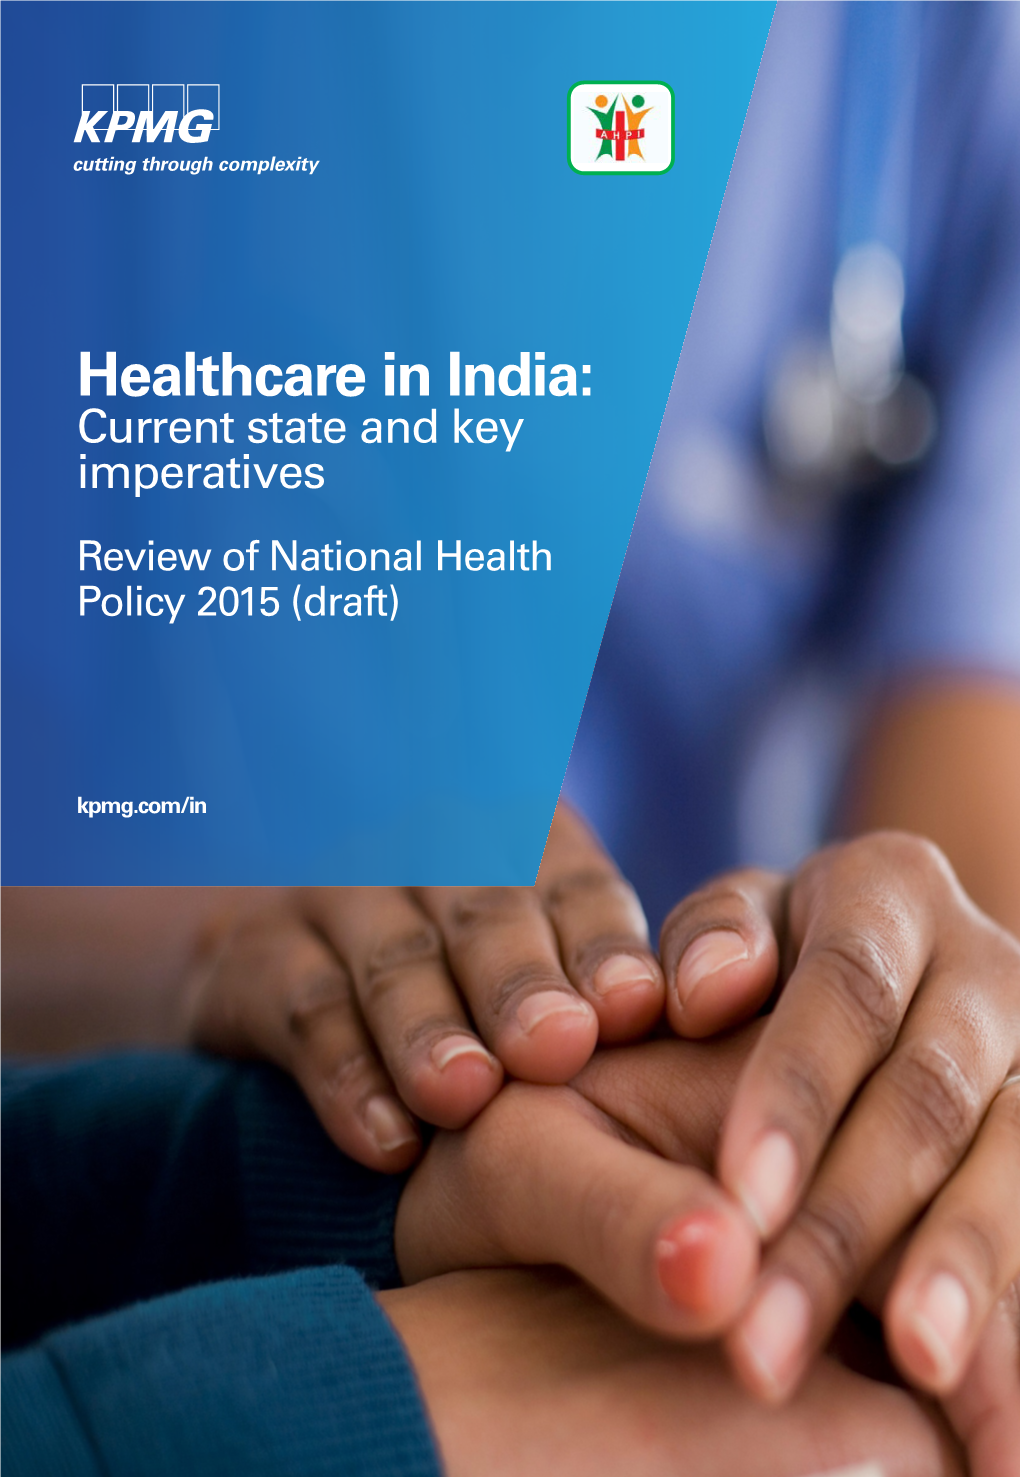 Healthcare in India: Current State and Key Imperatives Review of National Health Policy 2015 (Draft)